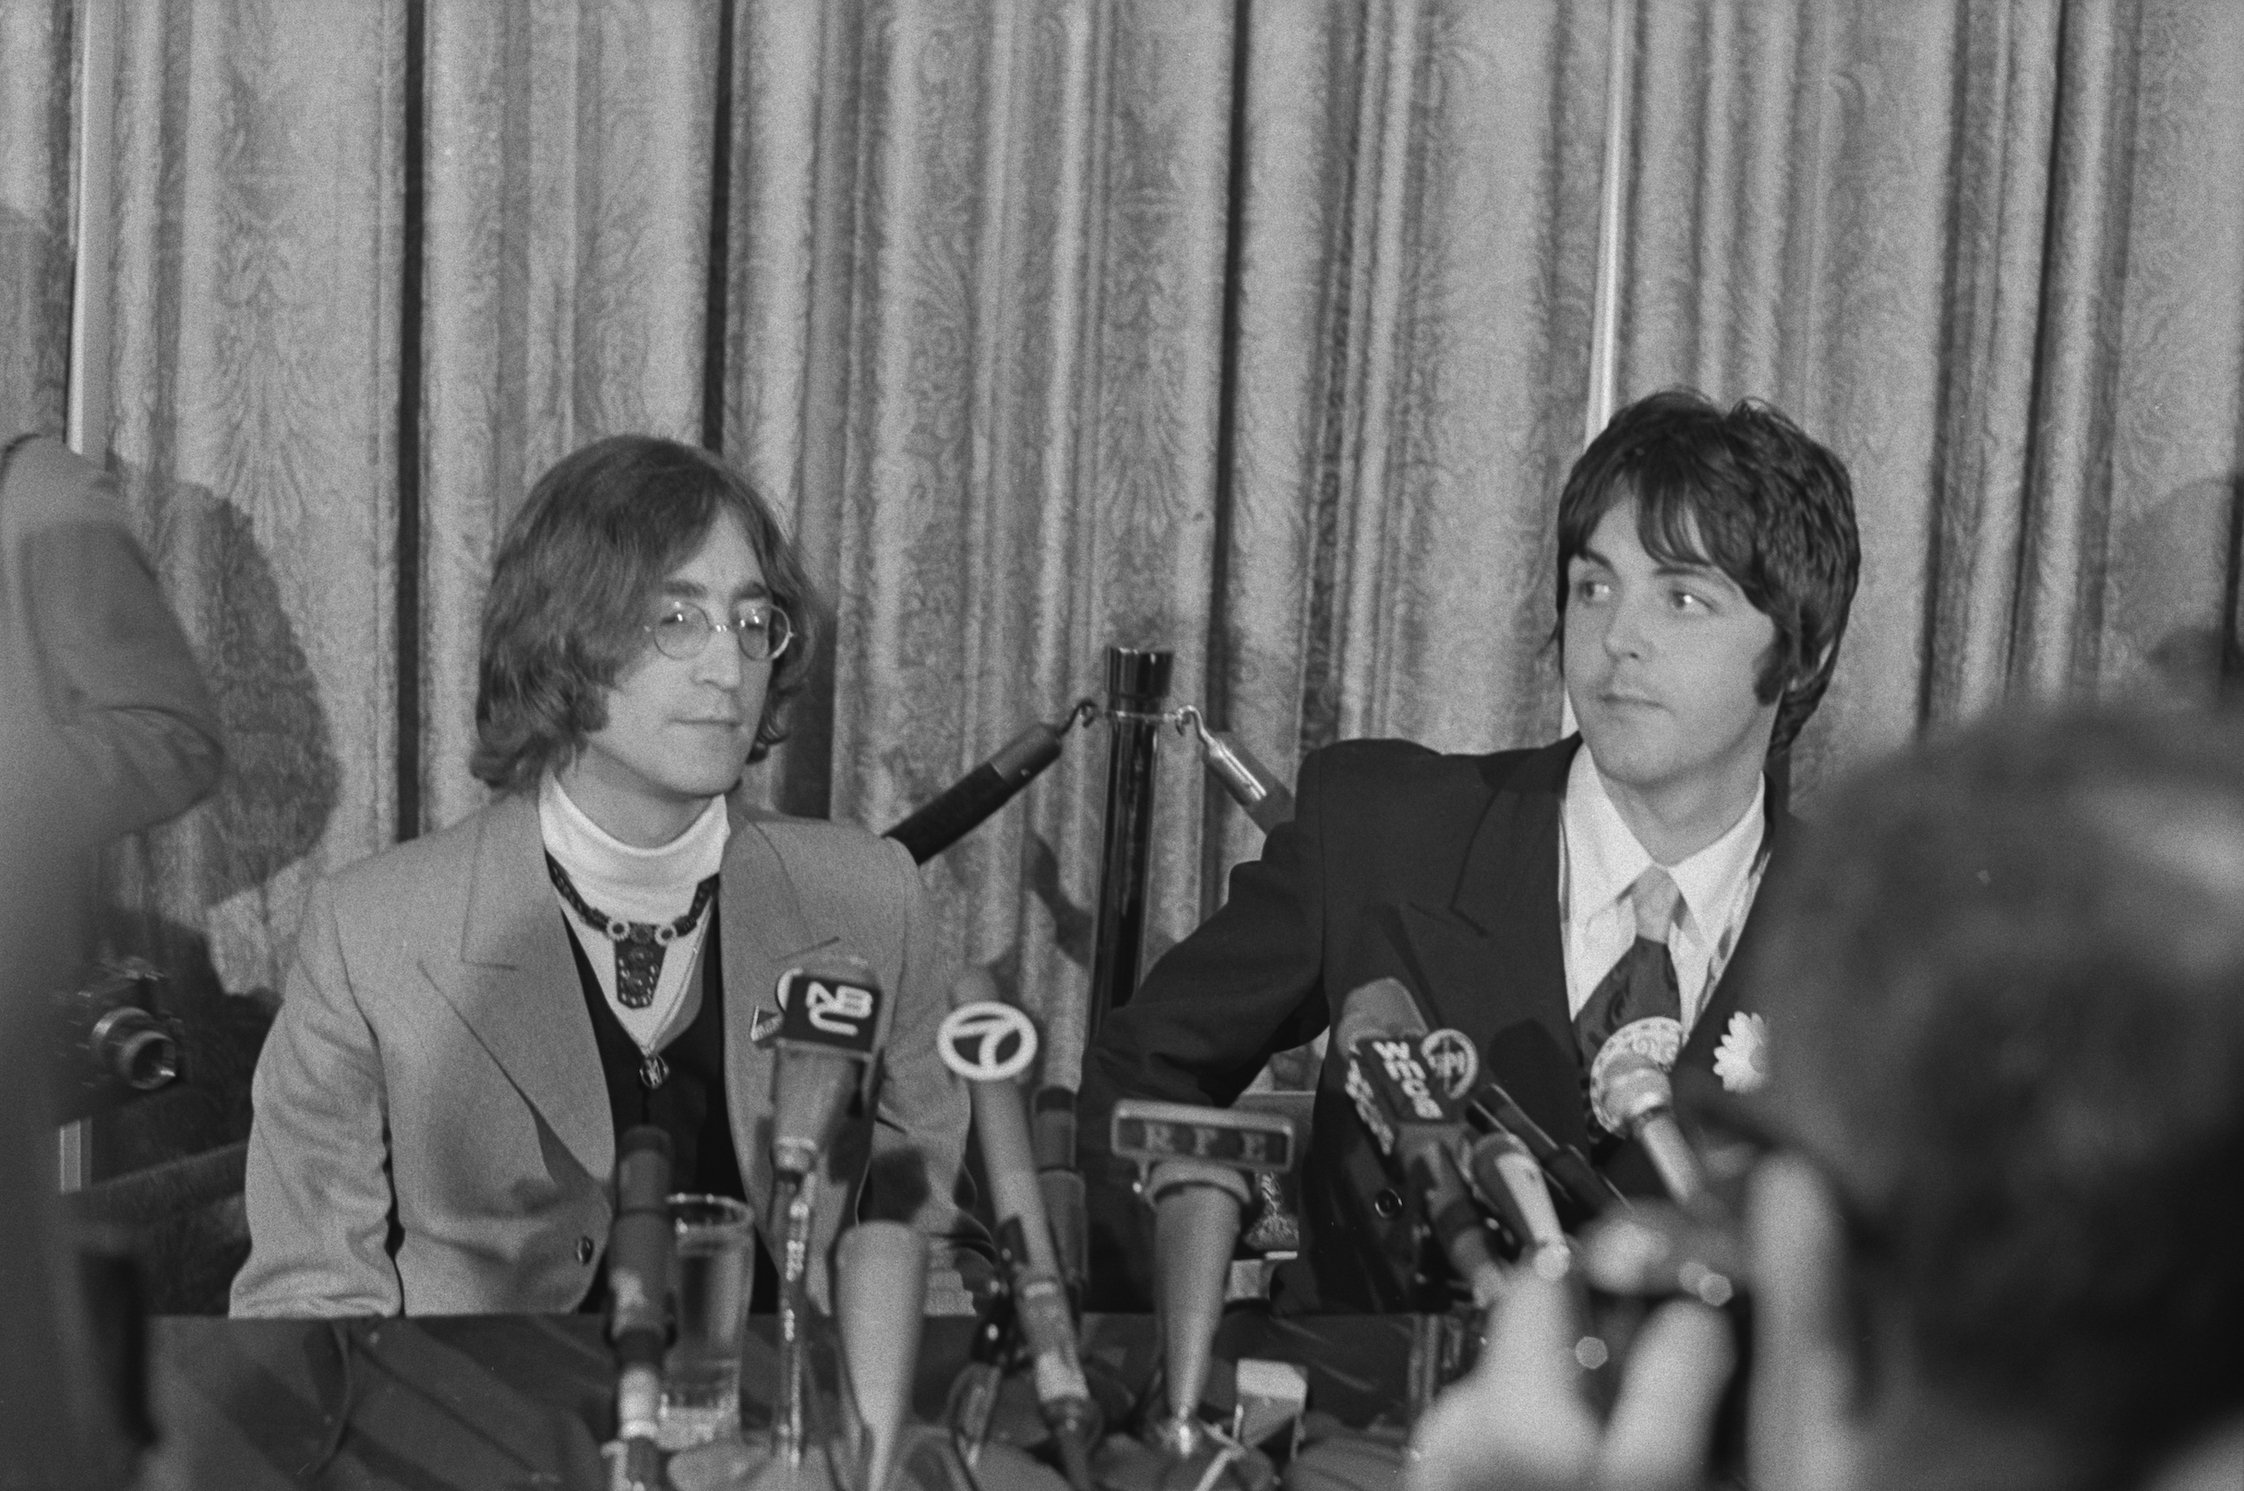 John Lennon and Paul McCartney of The Beatles hold a press conference to announce Apple Corps.